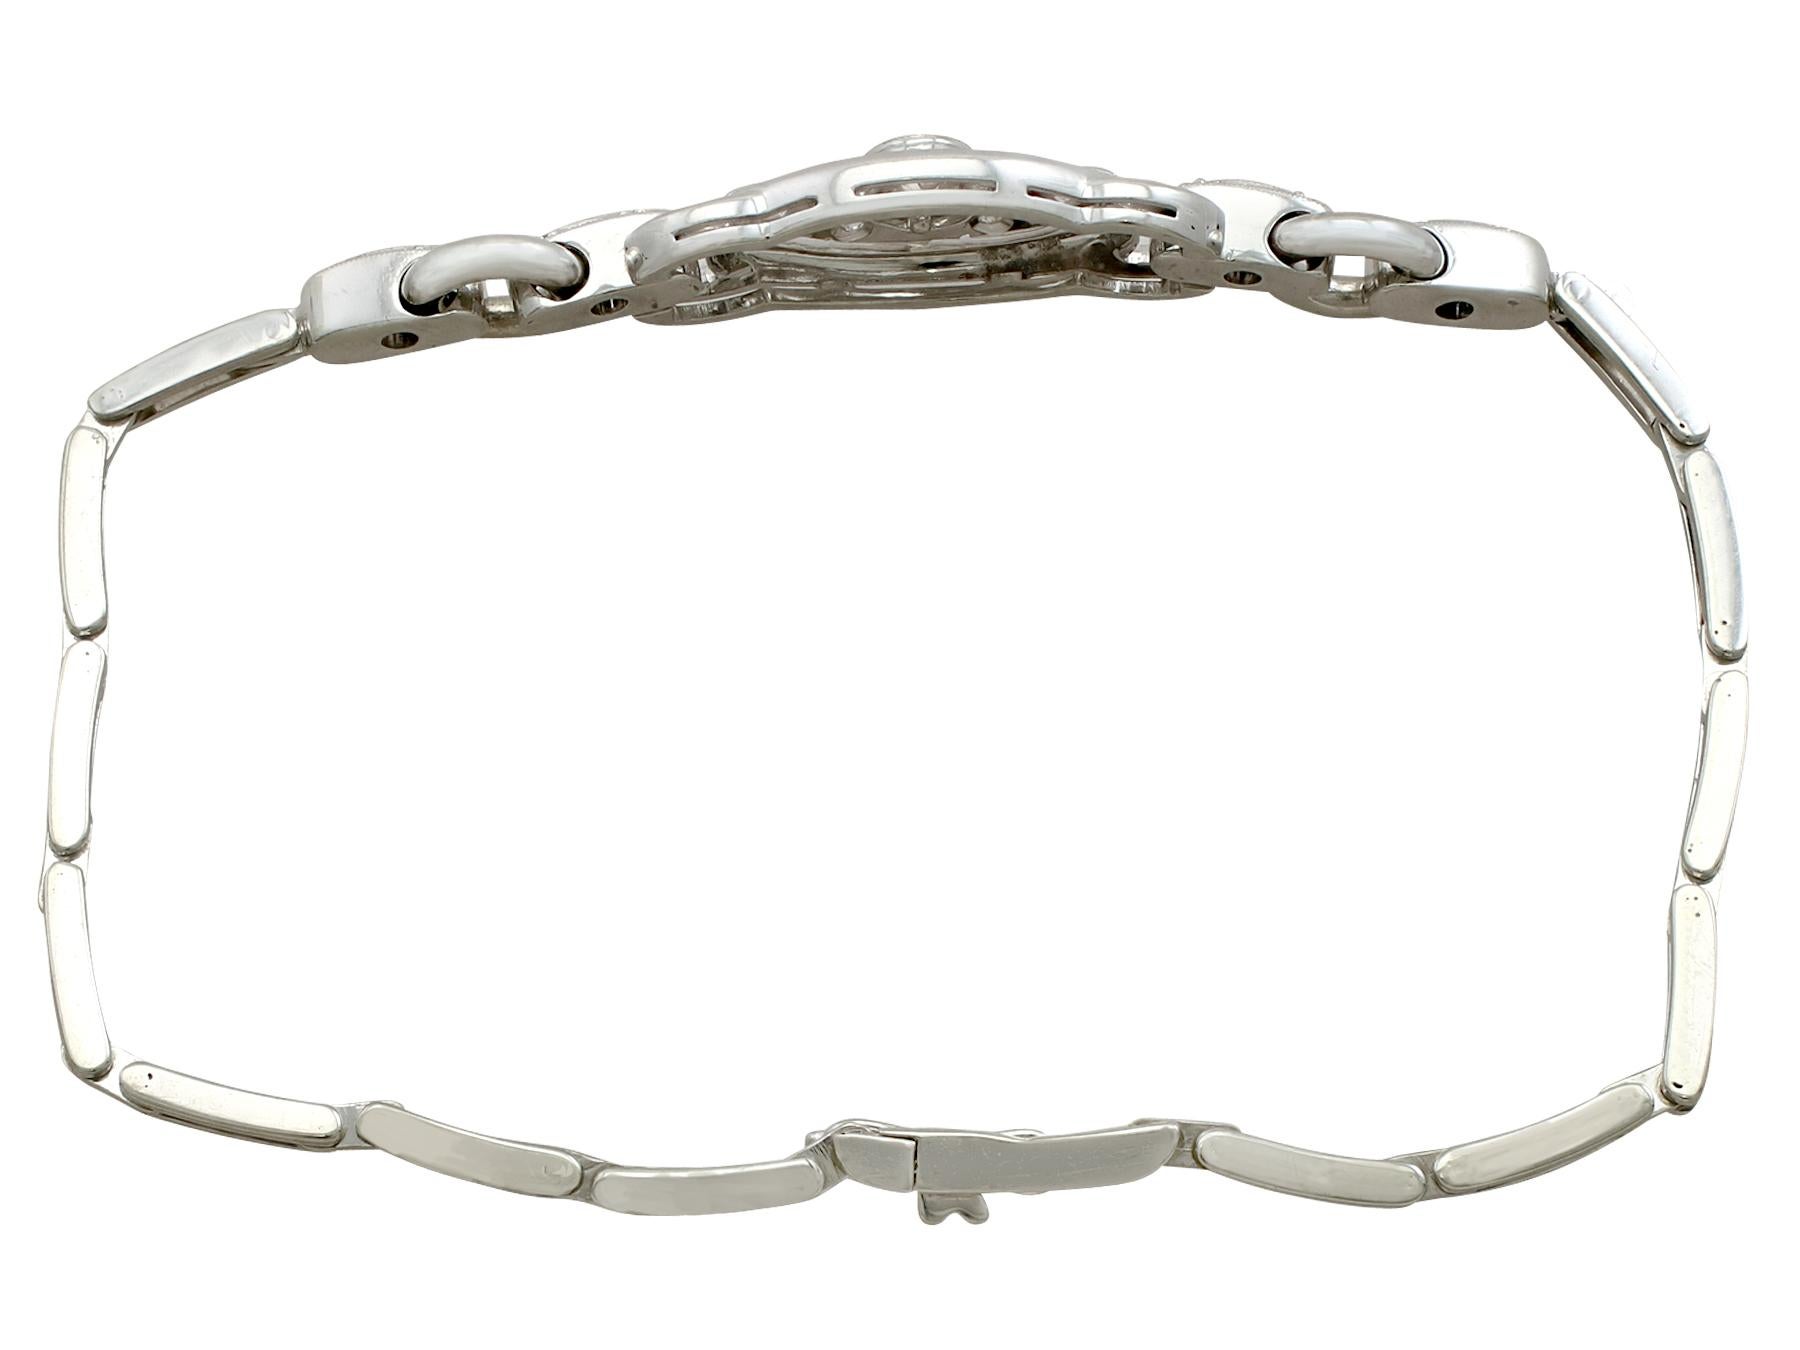 An impressive antique 1930's 0.38 carat diamond and 18 karat white gold bracelet; part of our diverse antique jewellery and estate jewelry collections.

This fine and impressive 1930's diamond bracelet has been crafted in 18k white gold.

The